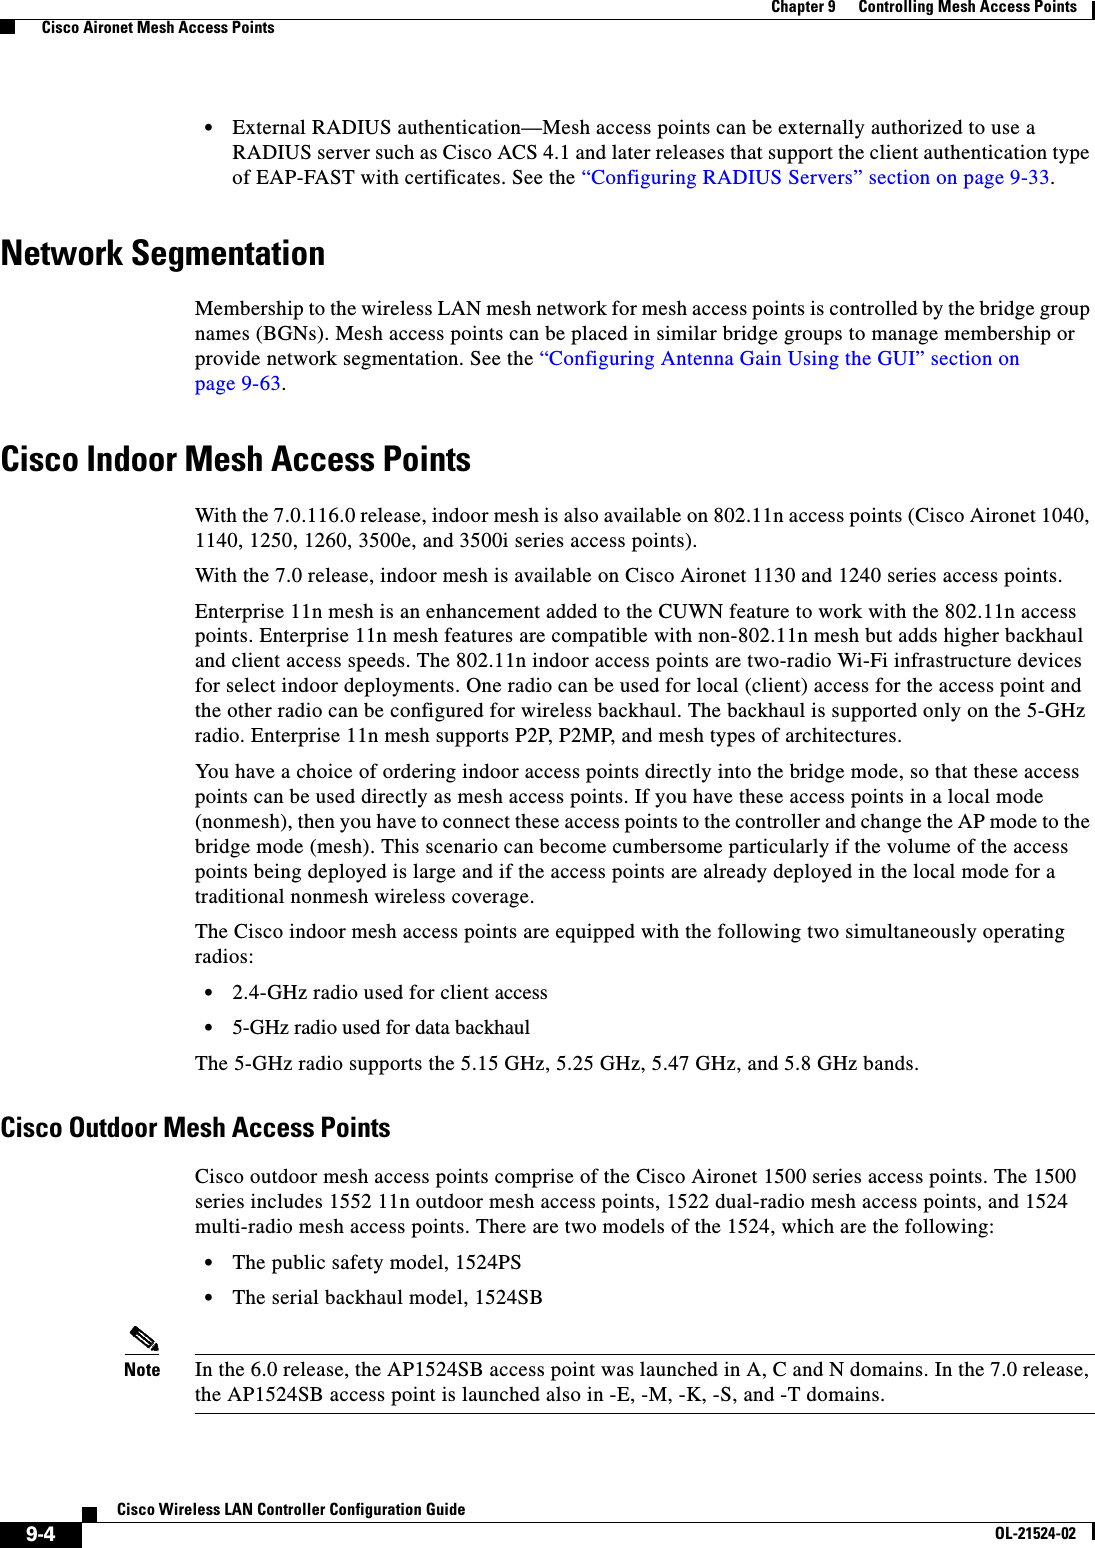  9-4Cisco Wireless LAN Controller Configuration GuideOL-21524-02Chapter 9      Controlling Mesh Access Points  Cisco Aironet Mesh Access Points  • External RADIUS authentication—Mesh access points can be externally authorized to use a RADIUS server such as Cisco ACS 4.1 and later releases that support the client authentication type of EAP-FAST with certificates. See the “Configuring RADIUS Servers” section on page 9-33.Network SegmentationMembership to the wireless LAN mesh network for mesh access points is controlled by the bridge group names (BGNs). Mesh access points can be placed in similar bridge groups to manage membership or provide network segmentation. See the “Configuring Antenna Gain Using the GUI” section on page 9-63.Cisco Indoor Mesh Access PointsWith the 7.0.116.0 release, indoor mesh is also available on 802.11n access points (Cisco Aironet 1040, 1140, 1250, 1260, 3500e, and 3500i series access points).With the 7.0 release, indoor mesh is available on Cisco Aironet 1130 and 1240 series access points.Enterprise 11n mesh is an enhancement added to the CUWN feature to work with the 802.11n access points. Enterprise 11n mesh features are compatible with non-802.11n mesh but adds higher backhaul and client access speeds. The 802.11n indoor access points are two-radio Wi-Fi infrastructure devices for select indoor deployments. One radio can be used for local (client) access for the access point and the other radio can be configured for wireless backhaul. The backhaul is supported only on the 5-GHz radio. Enterprise 11n mesh supports P2P, P2MP, and mesh types of architectures.You have a choice of ordering indoor access points directly into the bridge mode, so that these access points can be used directly as mesh access points. If you have these access points in a local mode (nonmesh), then you have to connect these access points to the controller and change the AP mode to the bridge mode (mesh). This scenario can become cumbersome particularly if the volume of the access points being deployed is large and if the access points are already deployed in the local mode for a traditional nonmesh wireless coverage.The Cisco indoor mesh access points are equipped with the following two simultaneously operating radios:  • 2.4-GHz radio used for client access  • 5-GHz radio used for data backhaulThe 5-GHz radio supports the 5.15 GHz, 5.25 GHz, 5.47 GHz, and 5.8 GHz bands.Cisco Outdoor Mesh Access PointsCisco outdoor mesh access points comprise of the Cisco Aironet 1500 series access points. The 1500 series includes 1552 11n outdoor mesh access points, 1522 dual-radio mesh access points, and 1524 multi-radio mesh access points. There are two models of the 1524, which are the following:  • The public safety model, 1524PS  • The serial backhaul model, 1524SBNote In the 6.0 release, the AP1524SB access point was launched in A, C and N domains. In the 7.0 release, the AP1524SB access point is launched also in -E, -M, -K, -S, and -T domains.